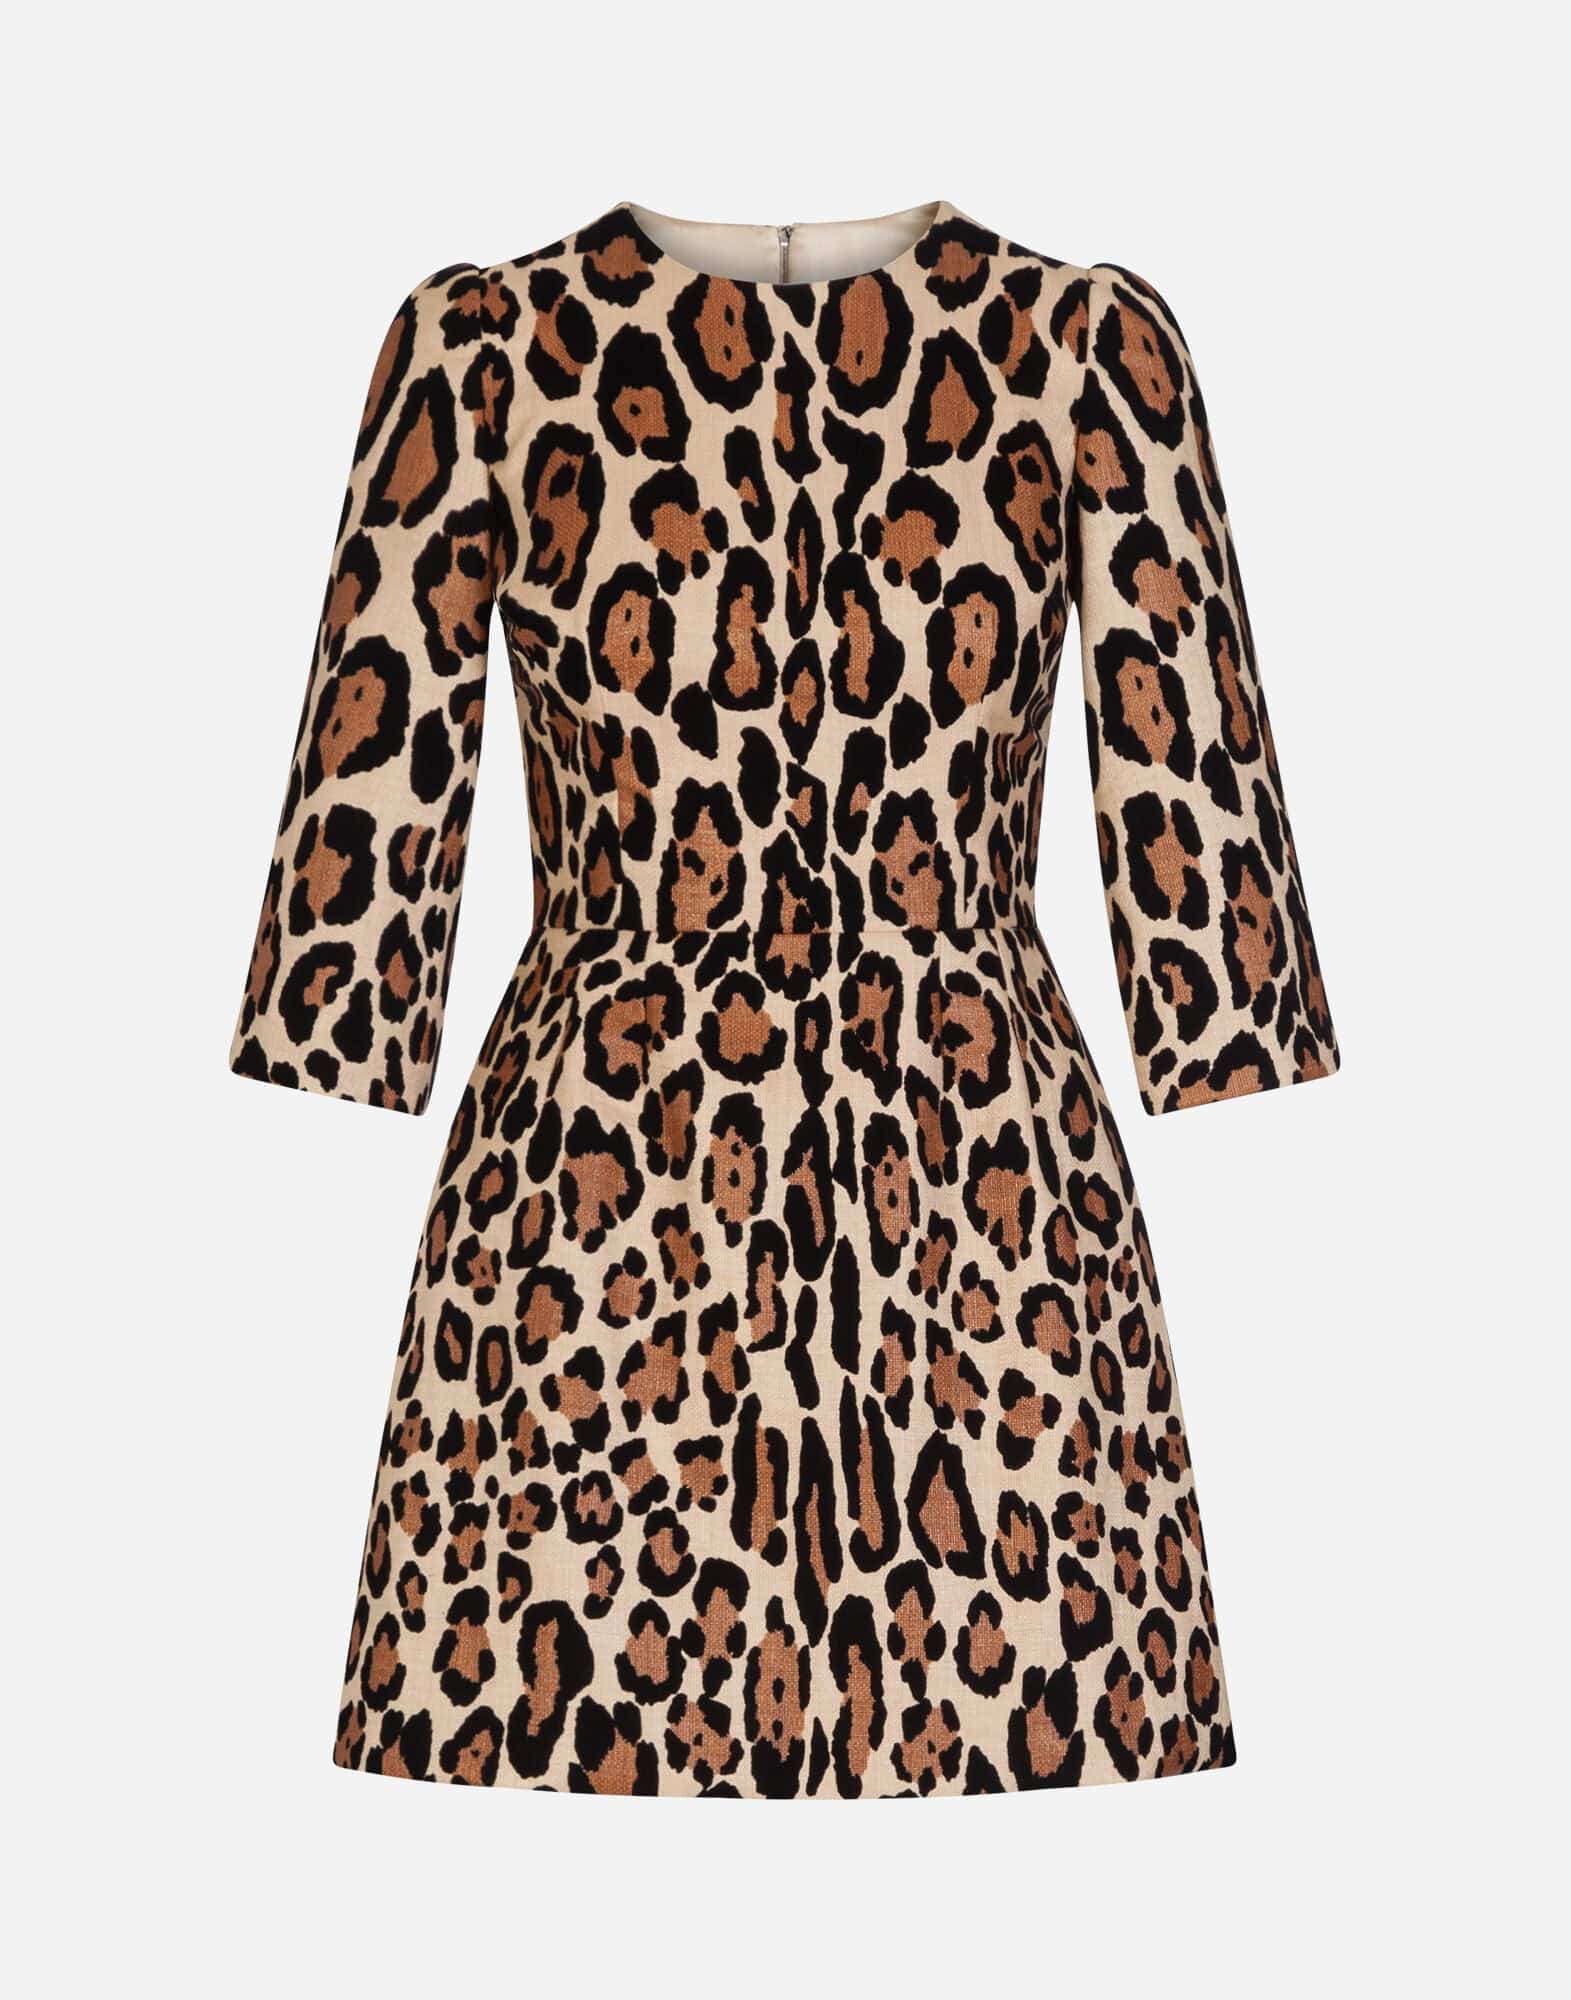 Dolce & Gabbana Short Dress In Woven Fabric With Flocked Leopard Print